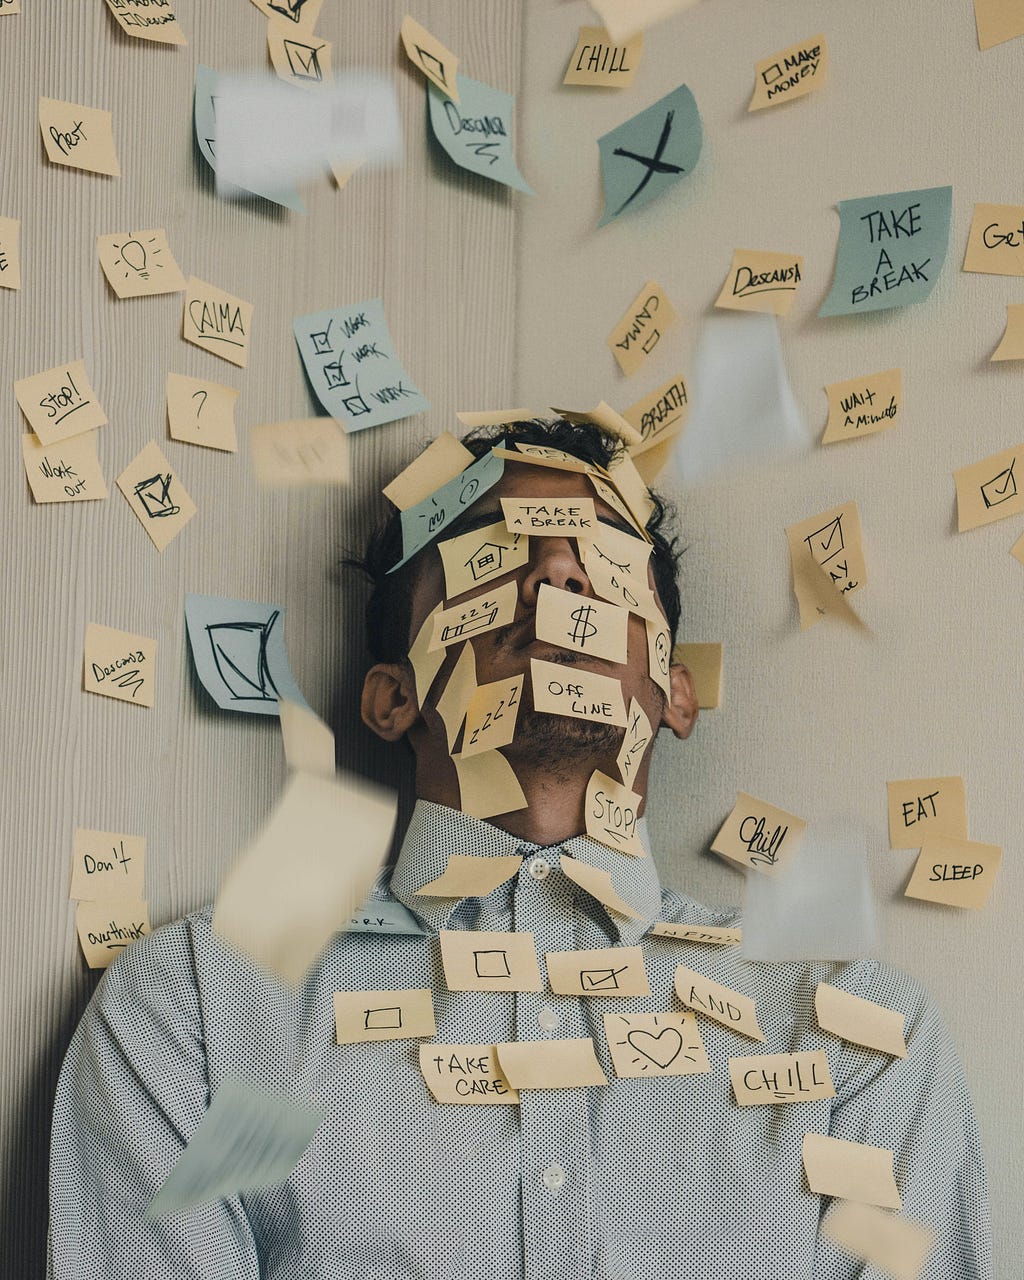 A person covered with Post-it notes